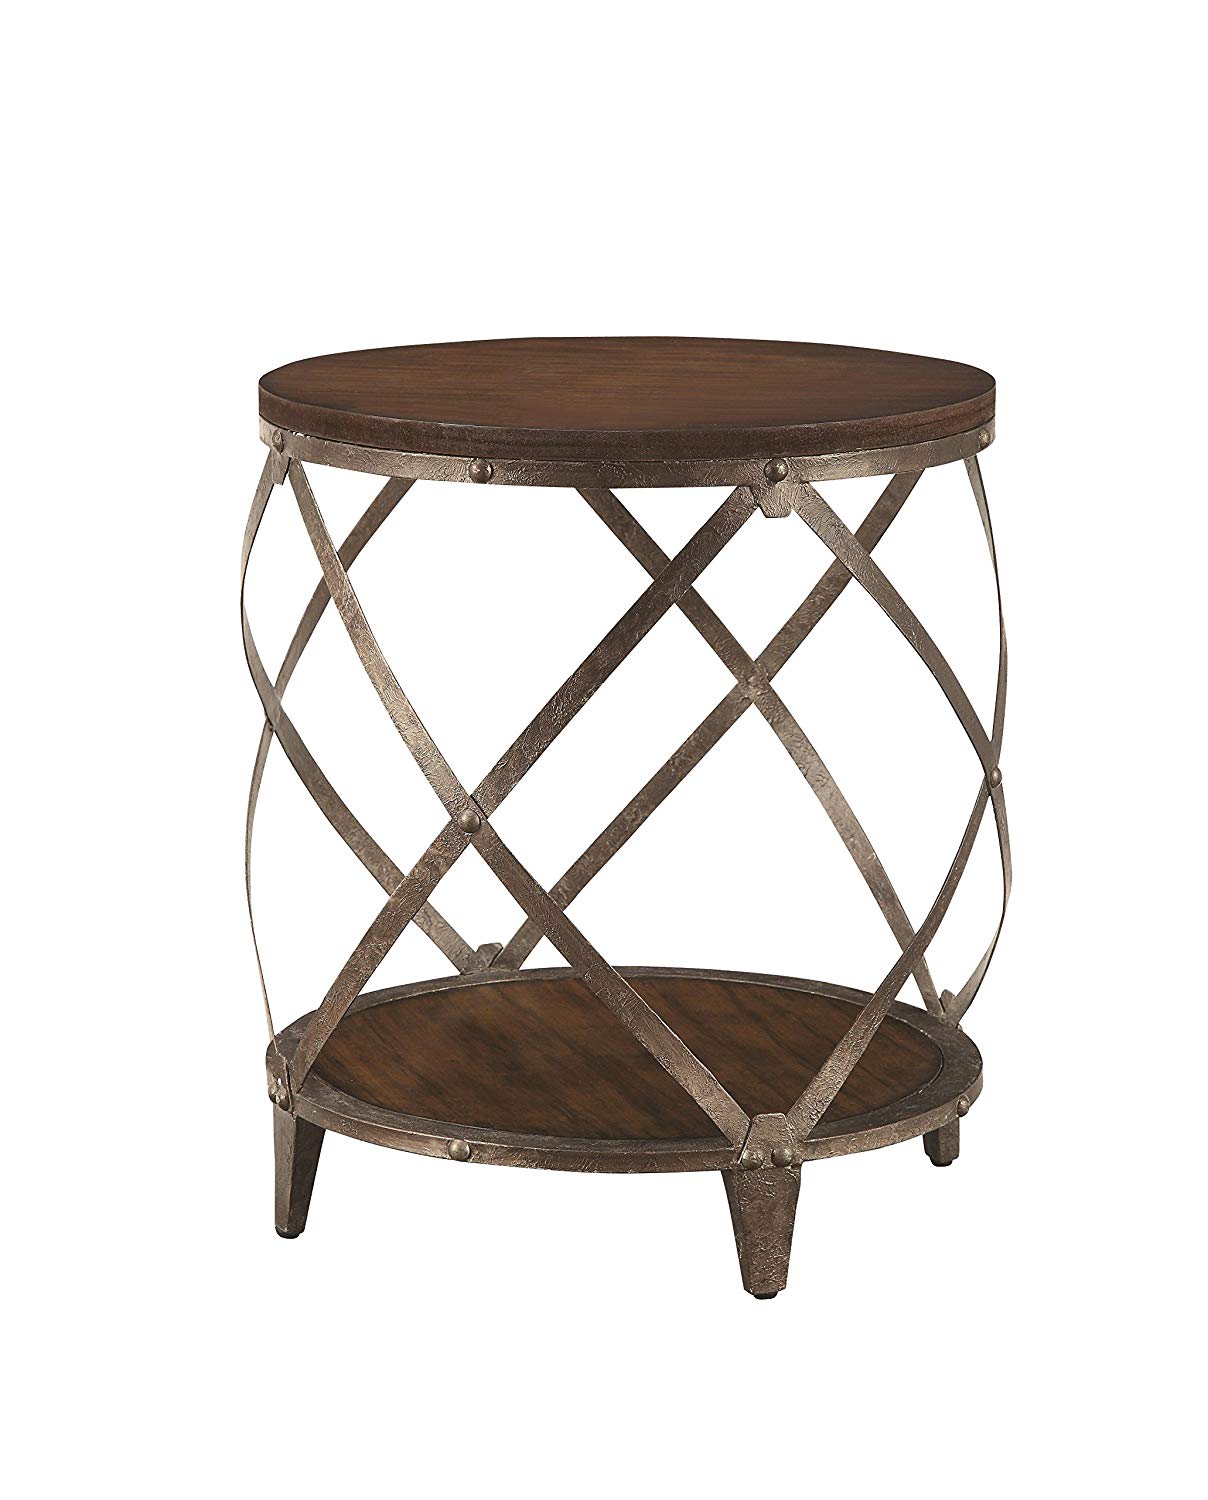 metal accent table with drum shape brown kitchen dining black inch round patio cover foyer chairs outdoor umbrella hole large chair aluminum side trestle height hairpin legs home